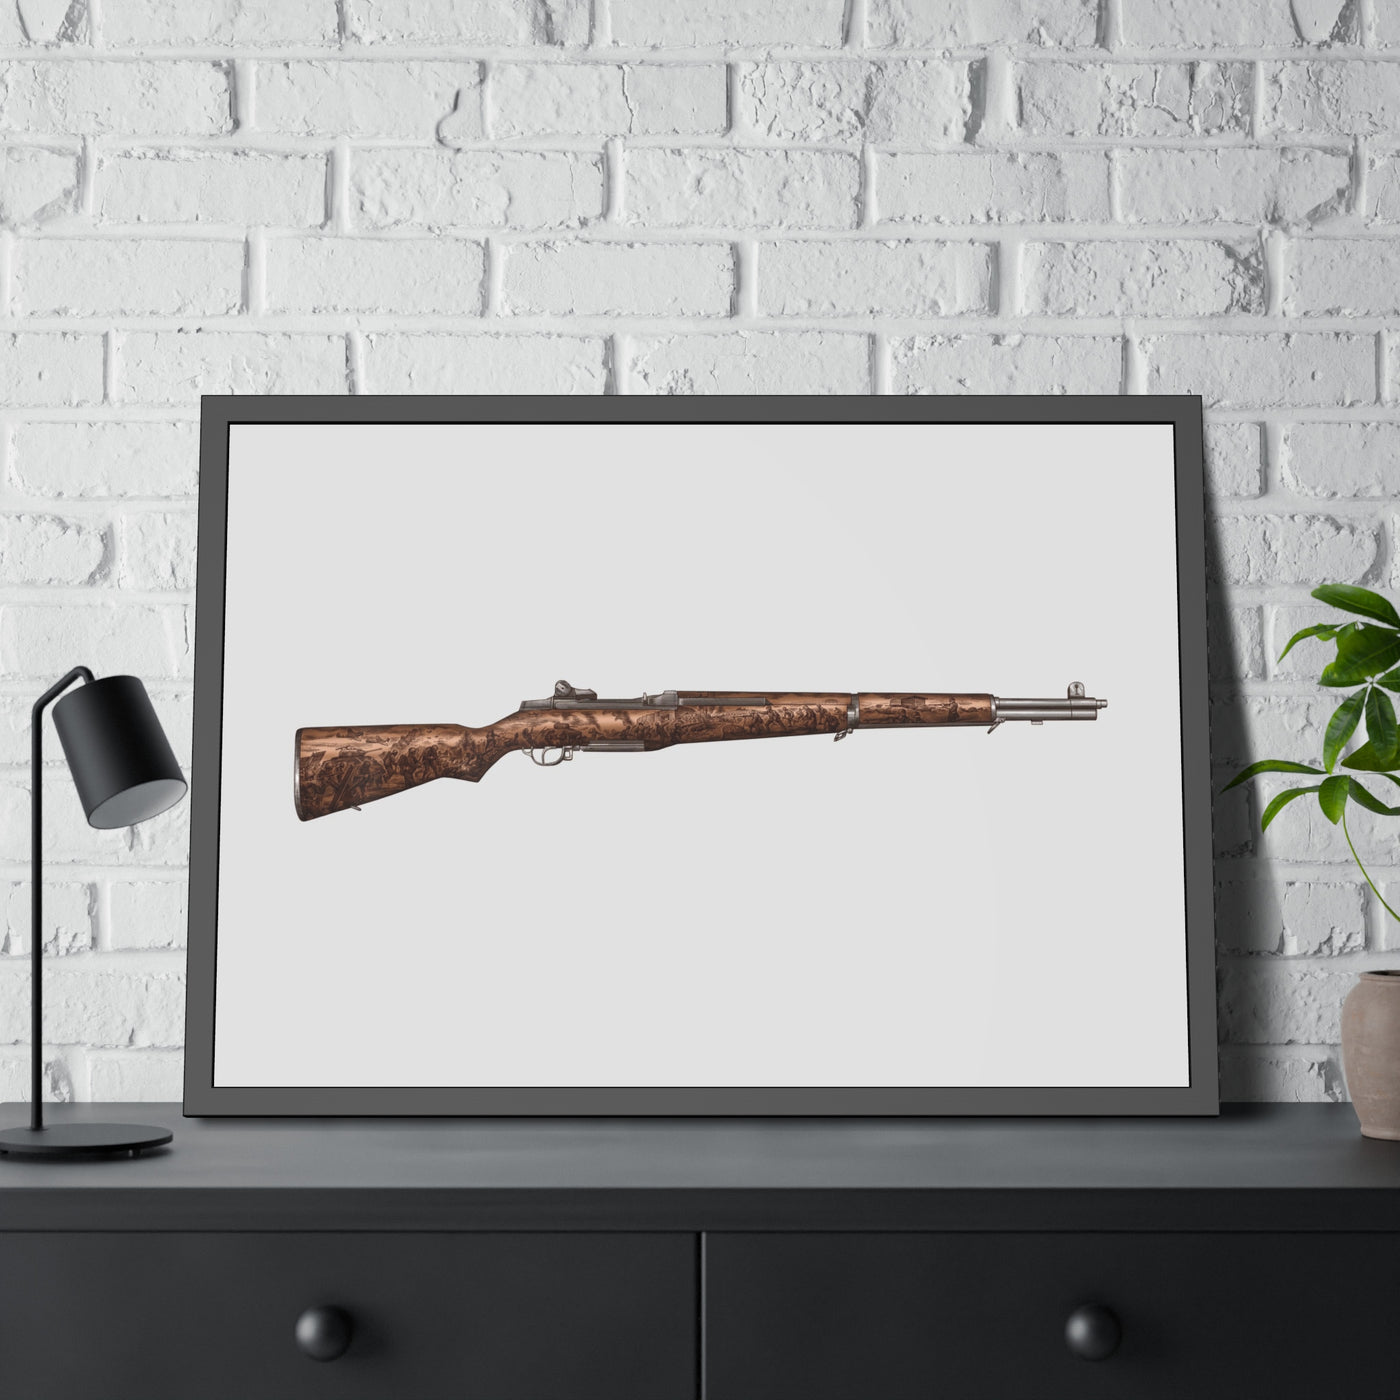 Honoring The Brave / M1 Garand / World War II D-Day Painting - Just The Piece - Black Frame - Value Collection